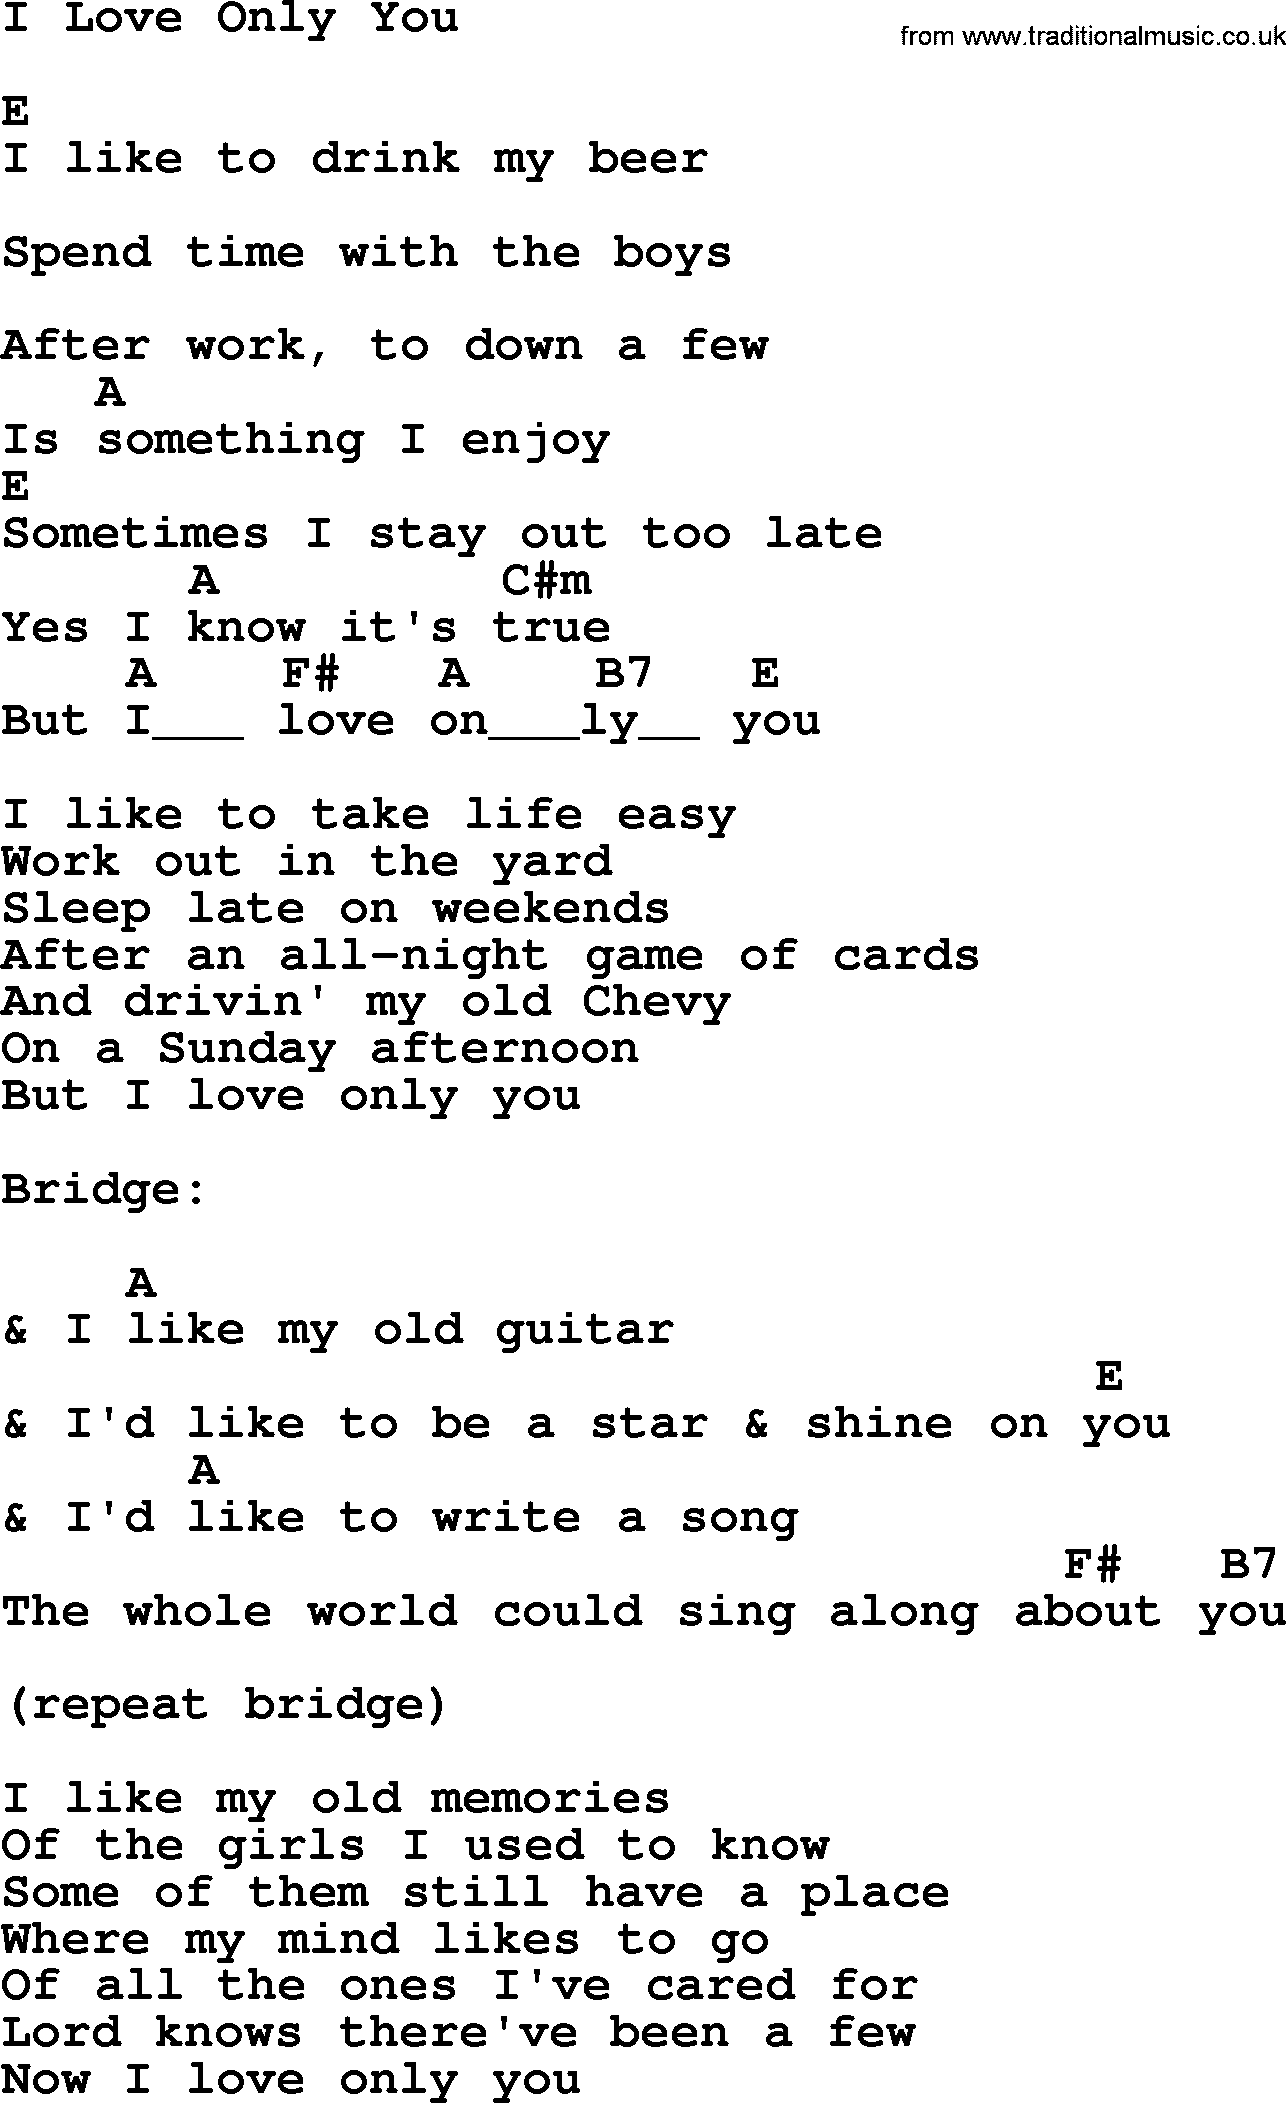 Bluegrass song: I Love Only You, lyrics and chords